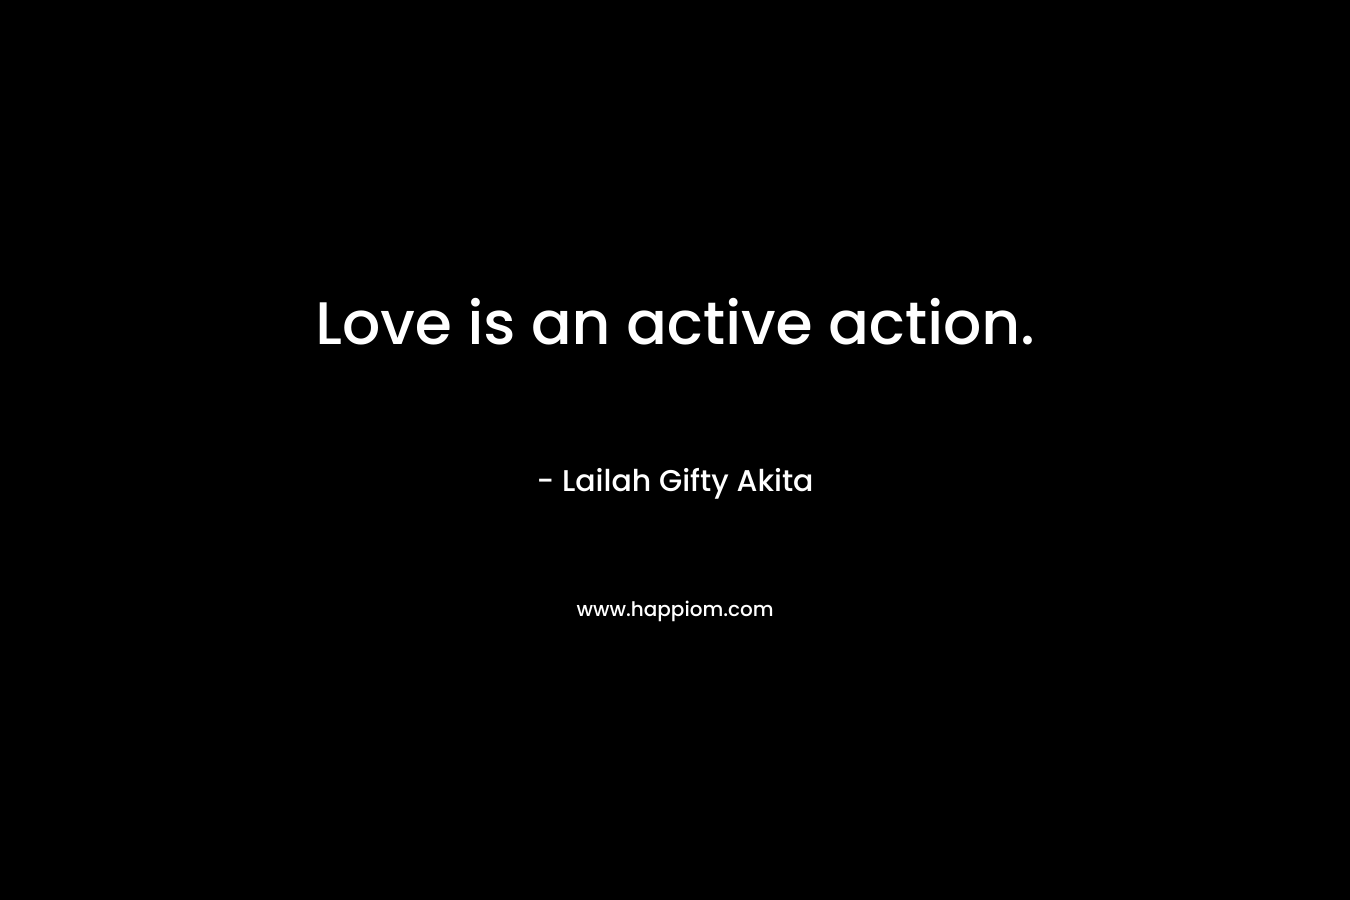 Love is an active action.